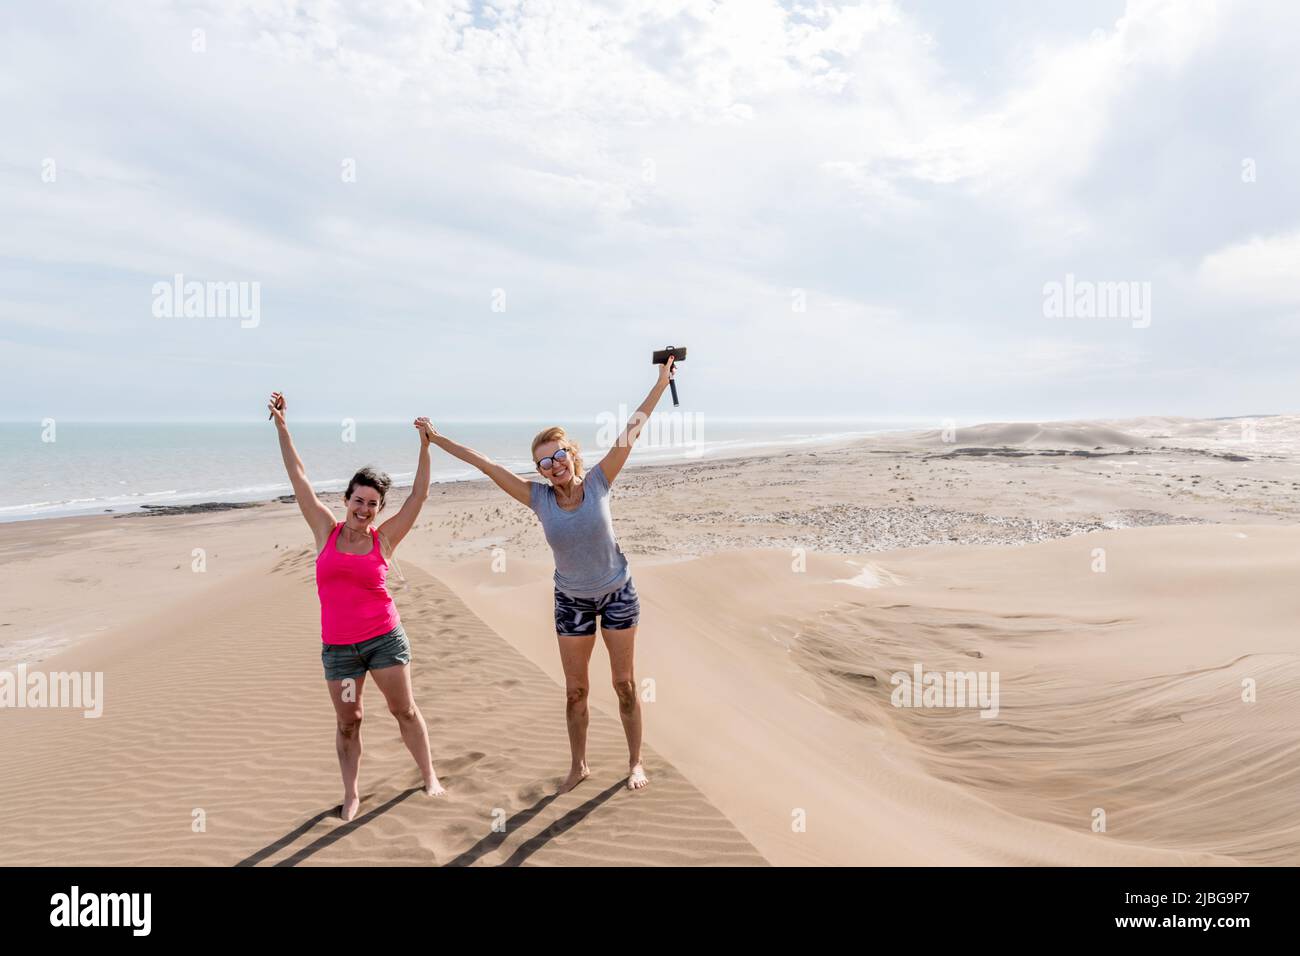 Mature mother and adult daughter with their arms raised, on a large dune with the beach in the background. Stock Photo